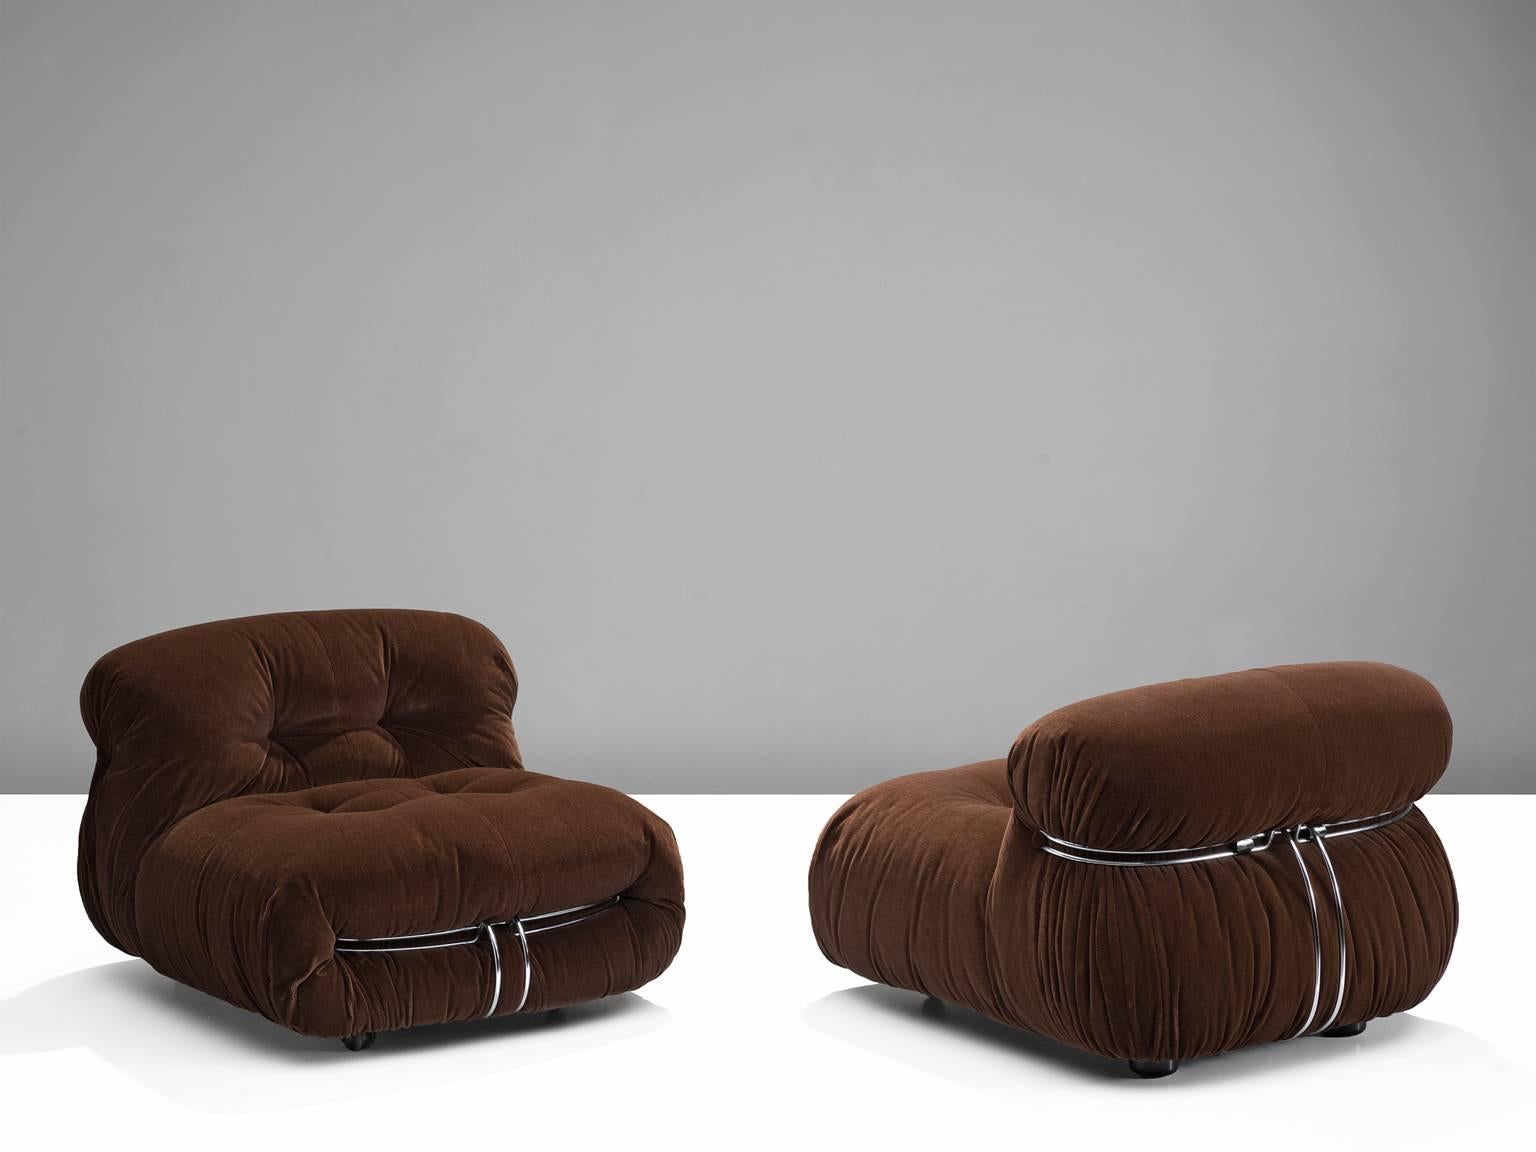 'Soriana' lounge chairs, in fabric and metal, by Afra & Tobia Scarpa for Cassina, Italy, 1969. 

Iconic lounge chairs by Italian designer couple Afra & Tobia Scarpa, the Soriana proposes a model that institutionalizes the image of the